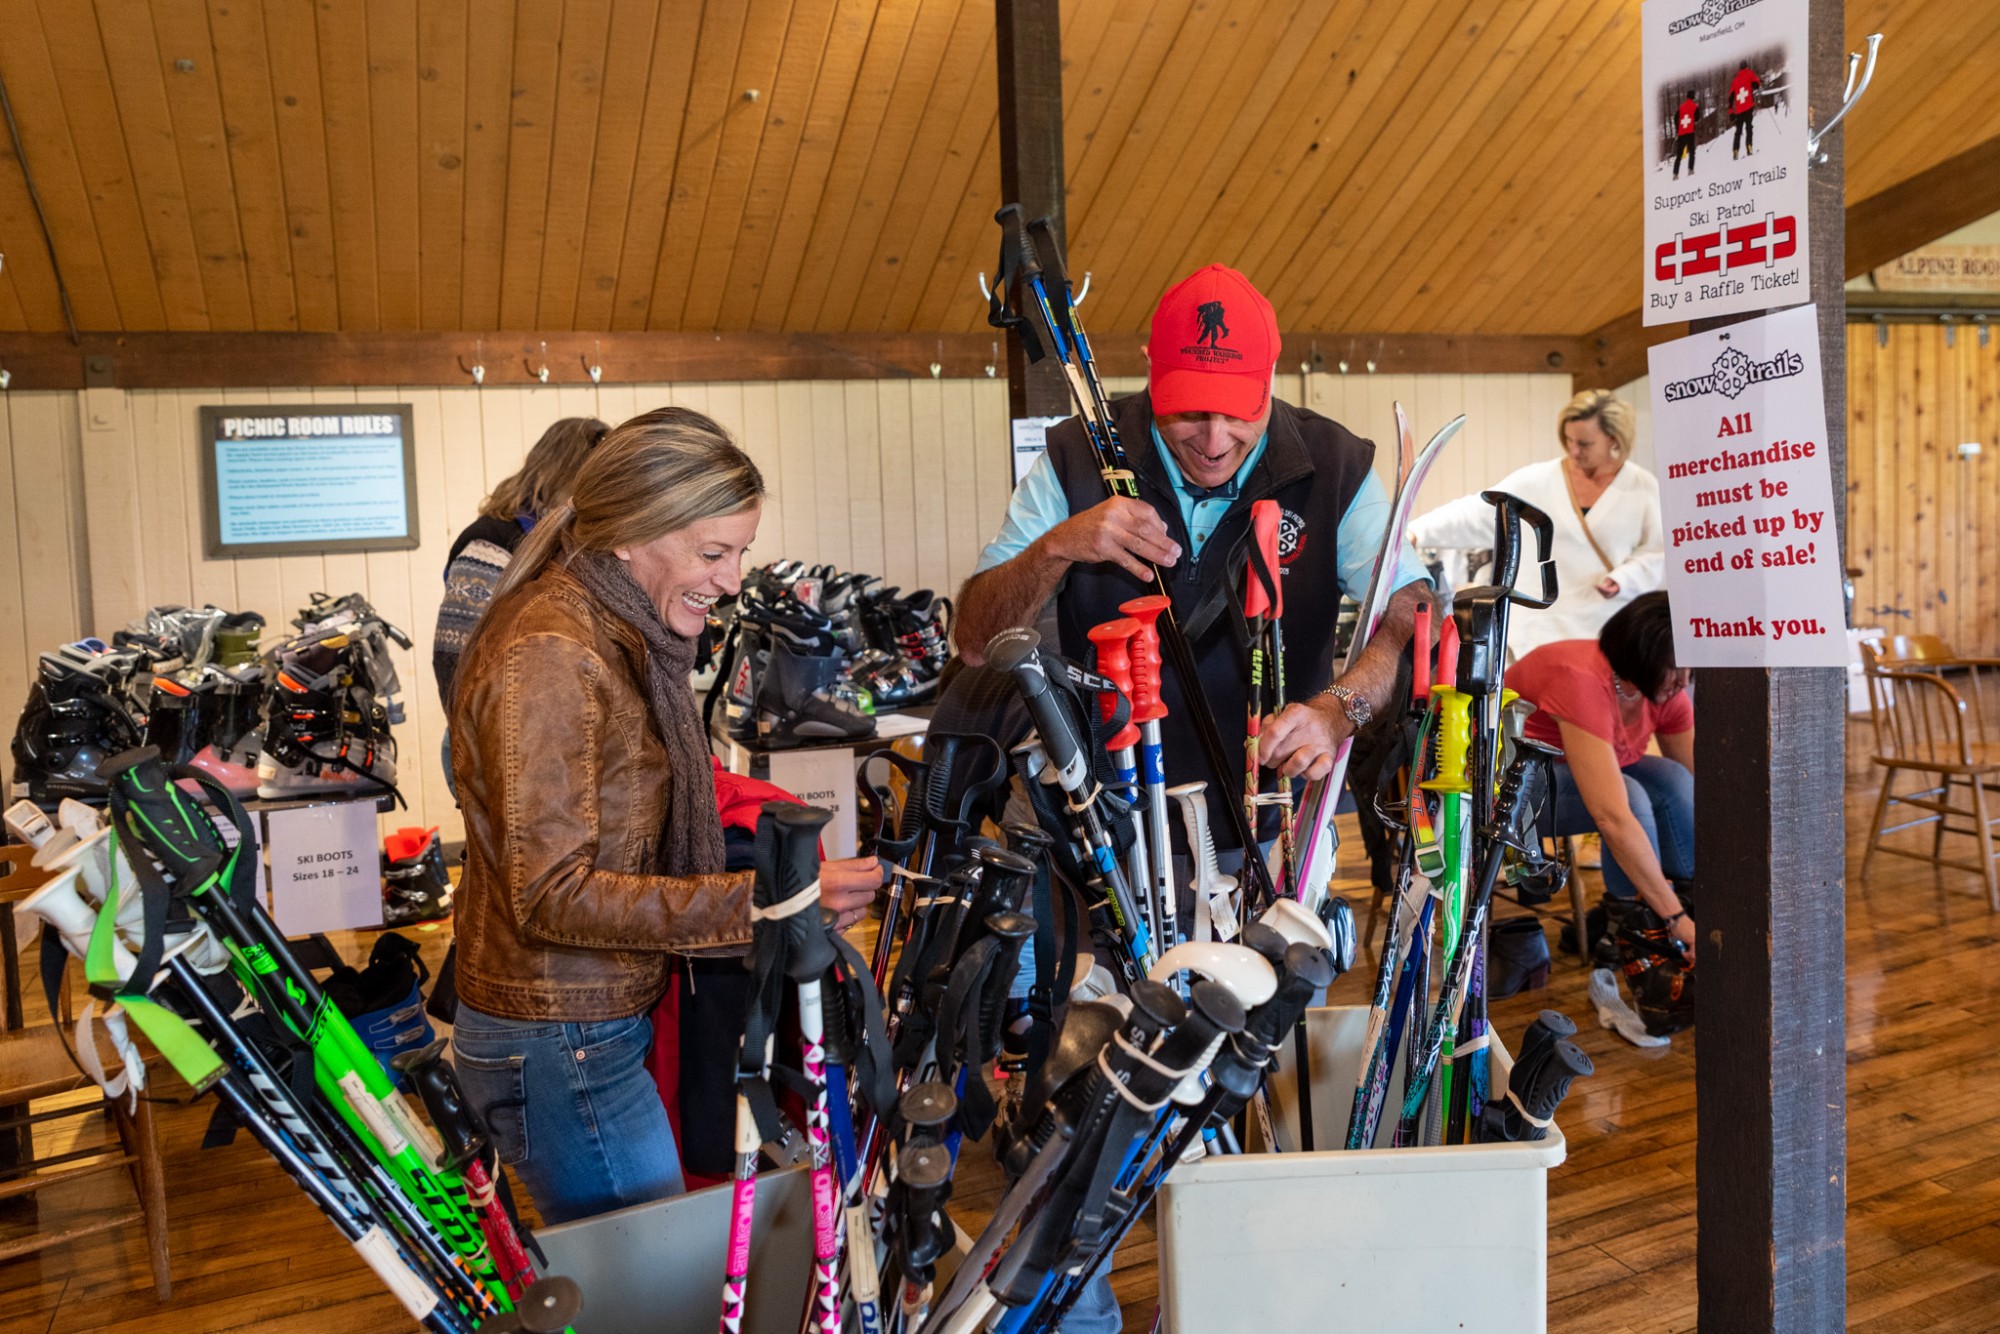 Cash for Your Ski and Snowboard Gear at Snow Trails